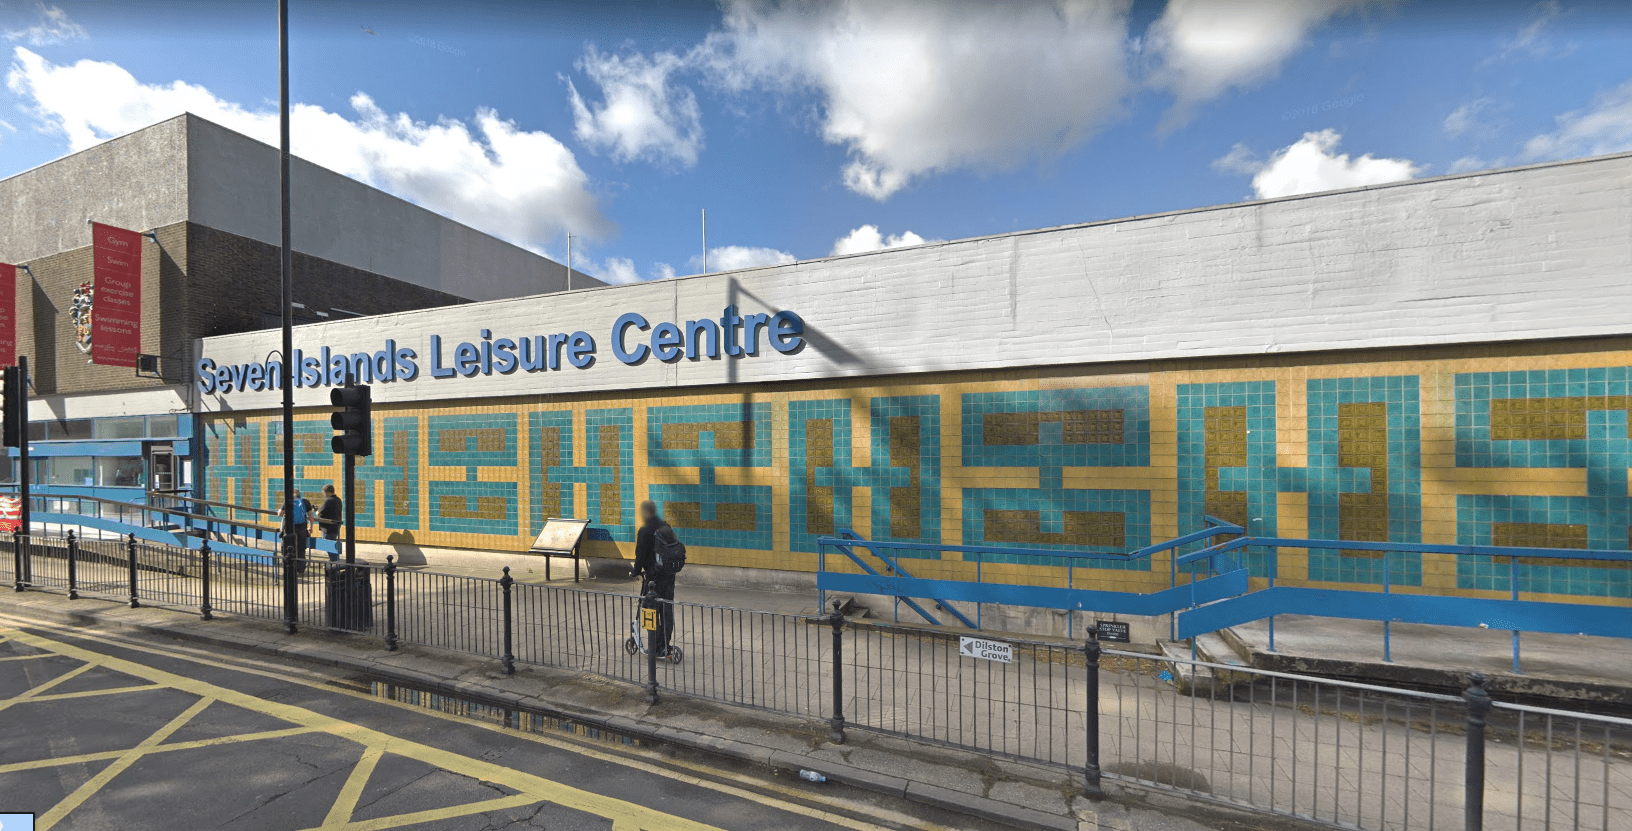 Seven Islands Leisure Centre (pictured) in Lower Road, where the man was found unresponsive